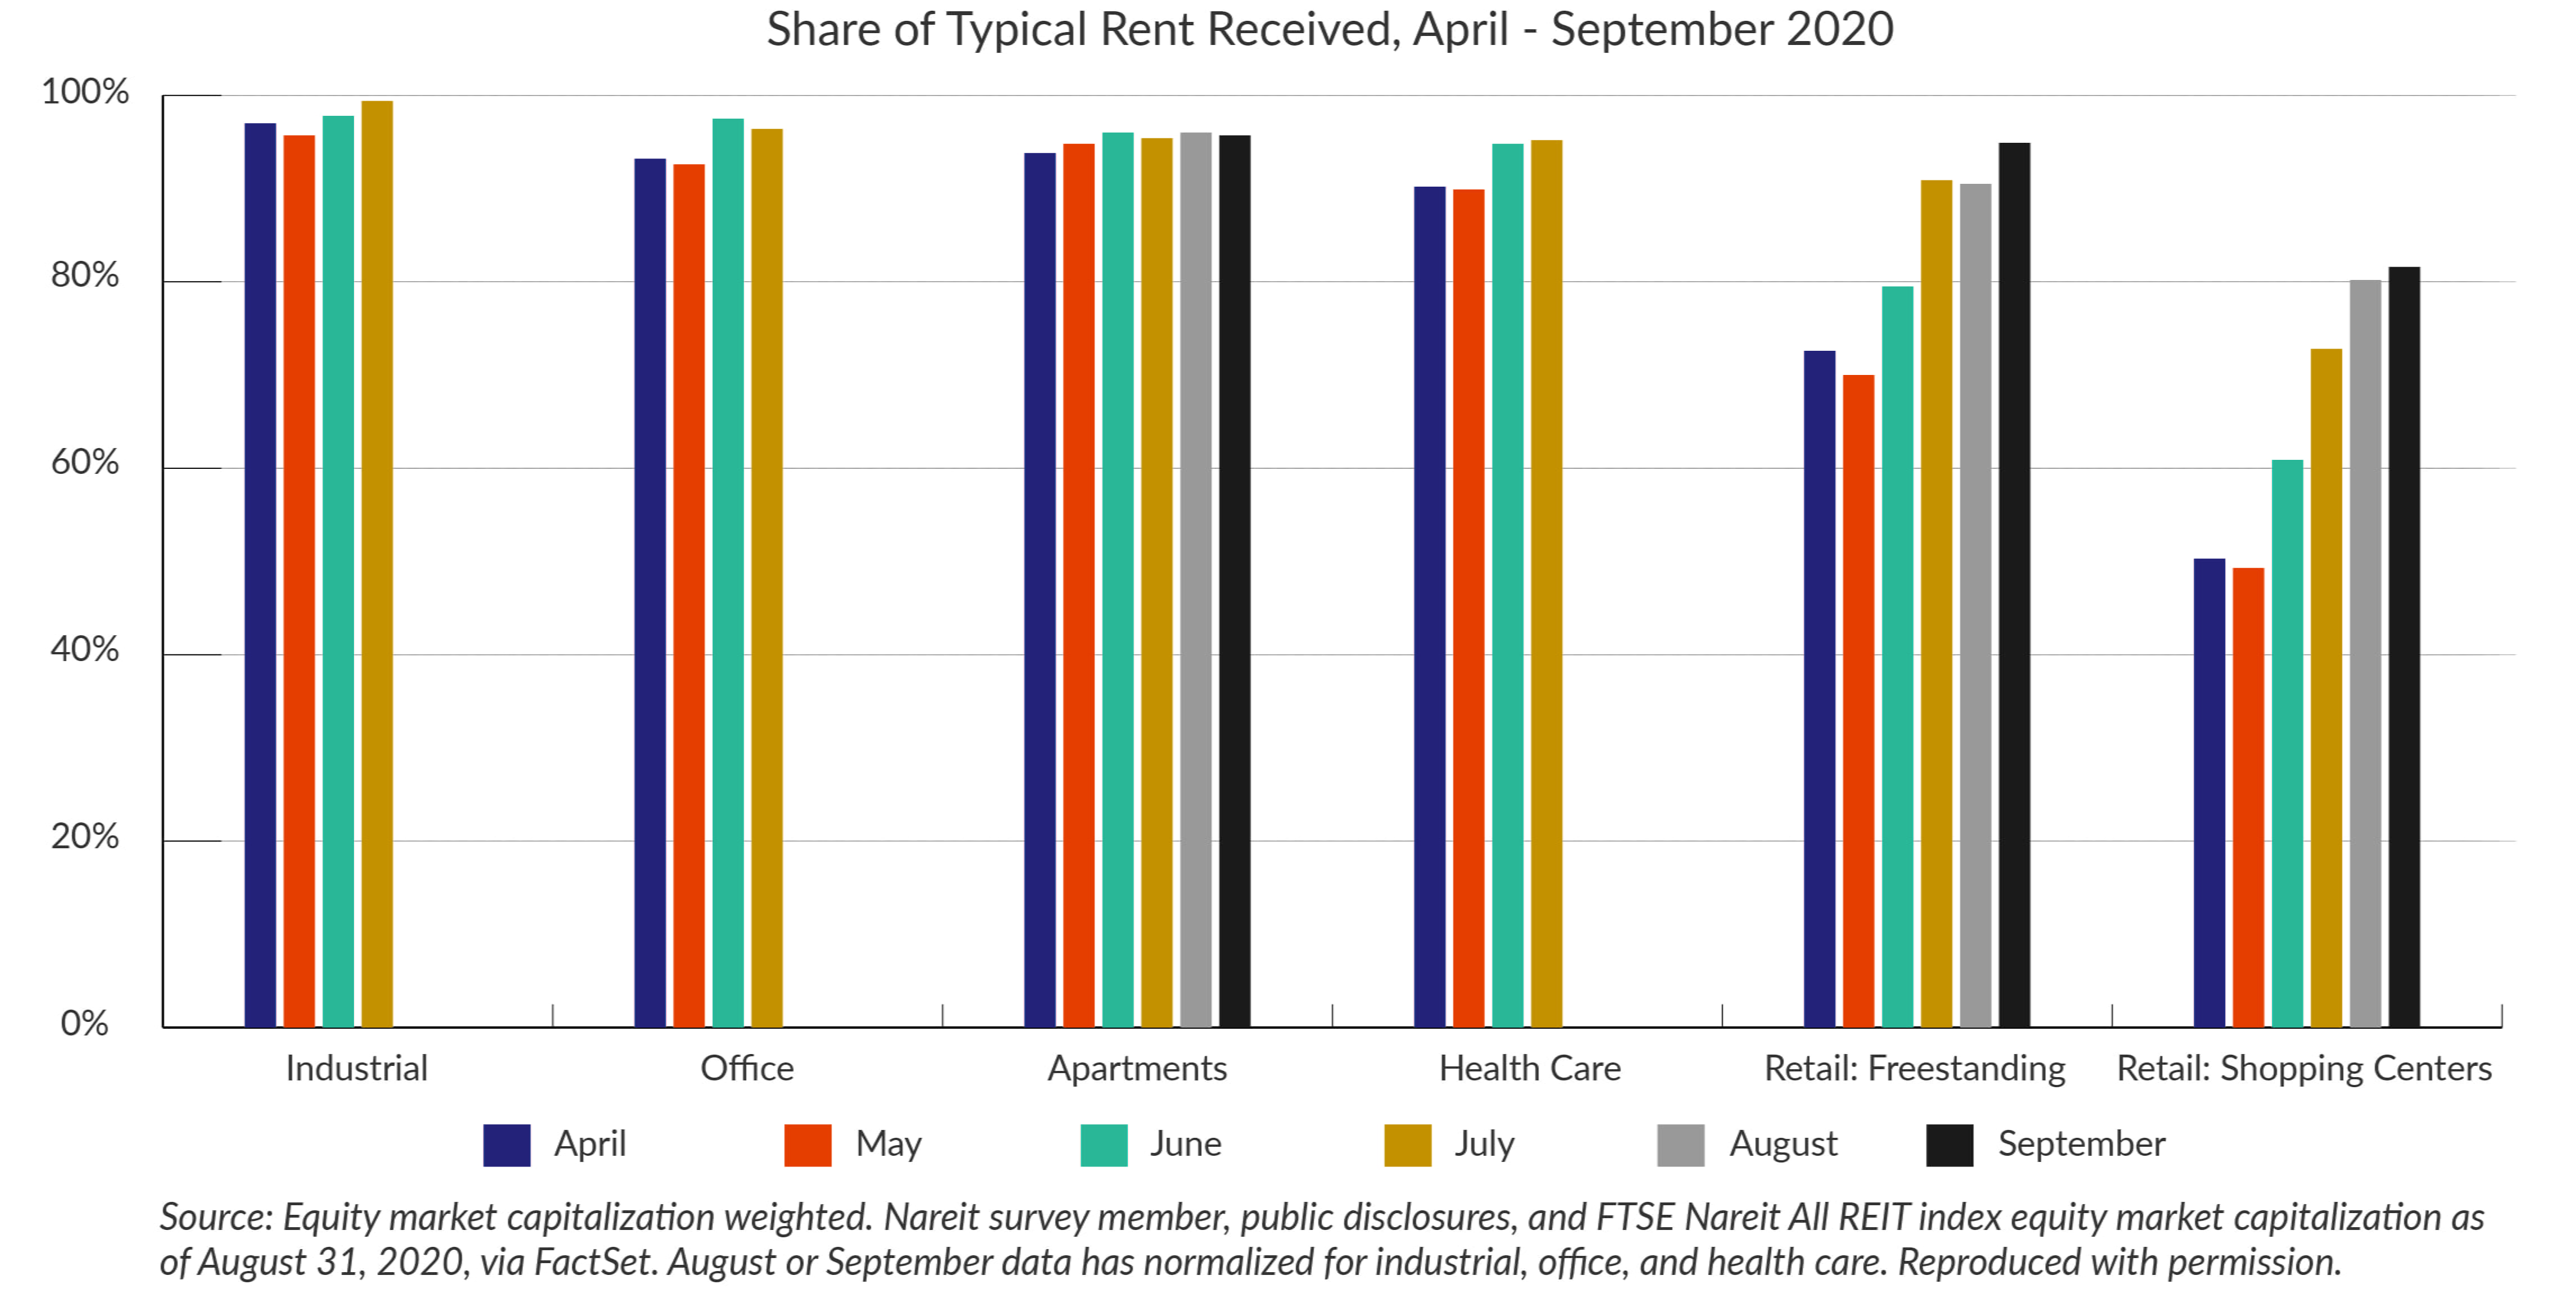 Bar graph describing Share of Typical Rent Received, April - September 2020, Source: Equity market capitalization weighted. Nareit survey member, public disclosures, and FTSE Nareit All REIT index equity market capitalization as of August 31, 2020, via FactSet. Reproduced with permission from Nareit.